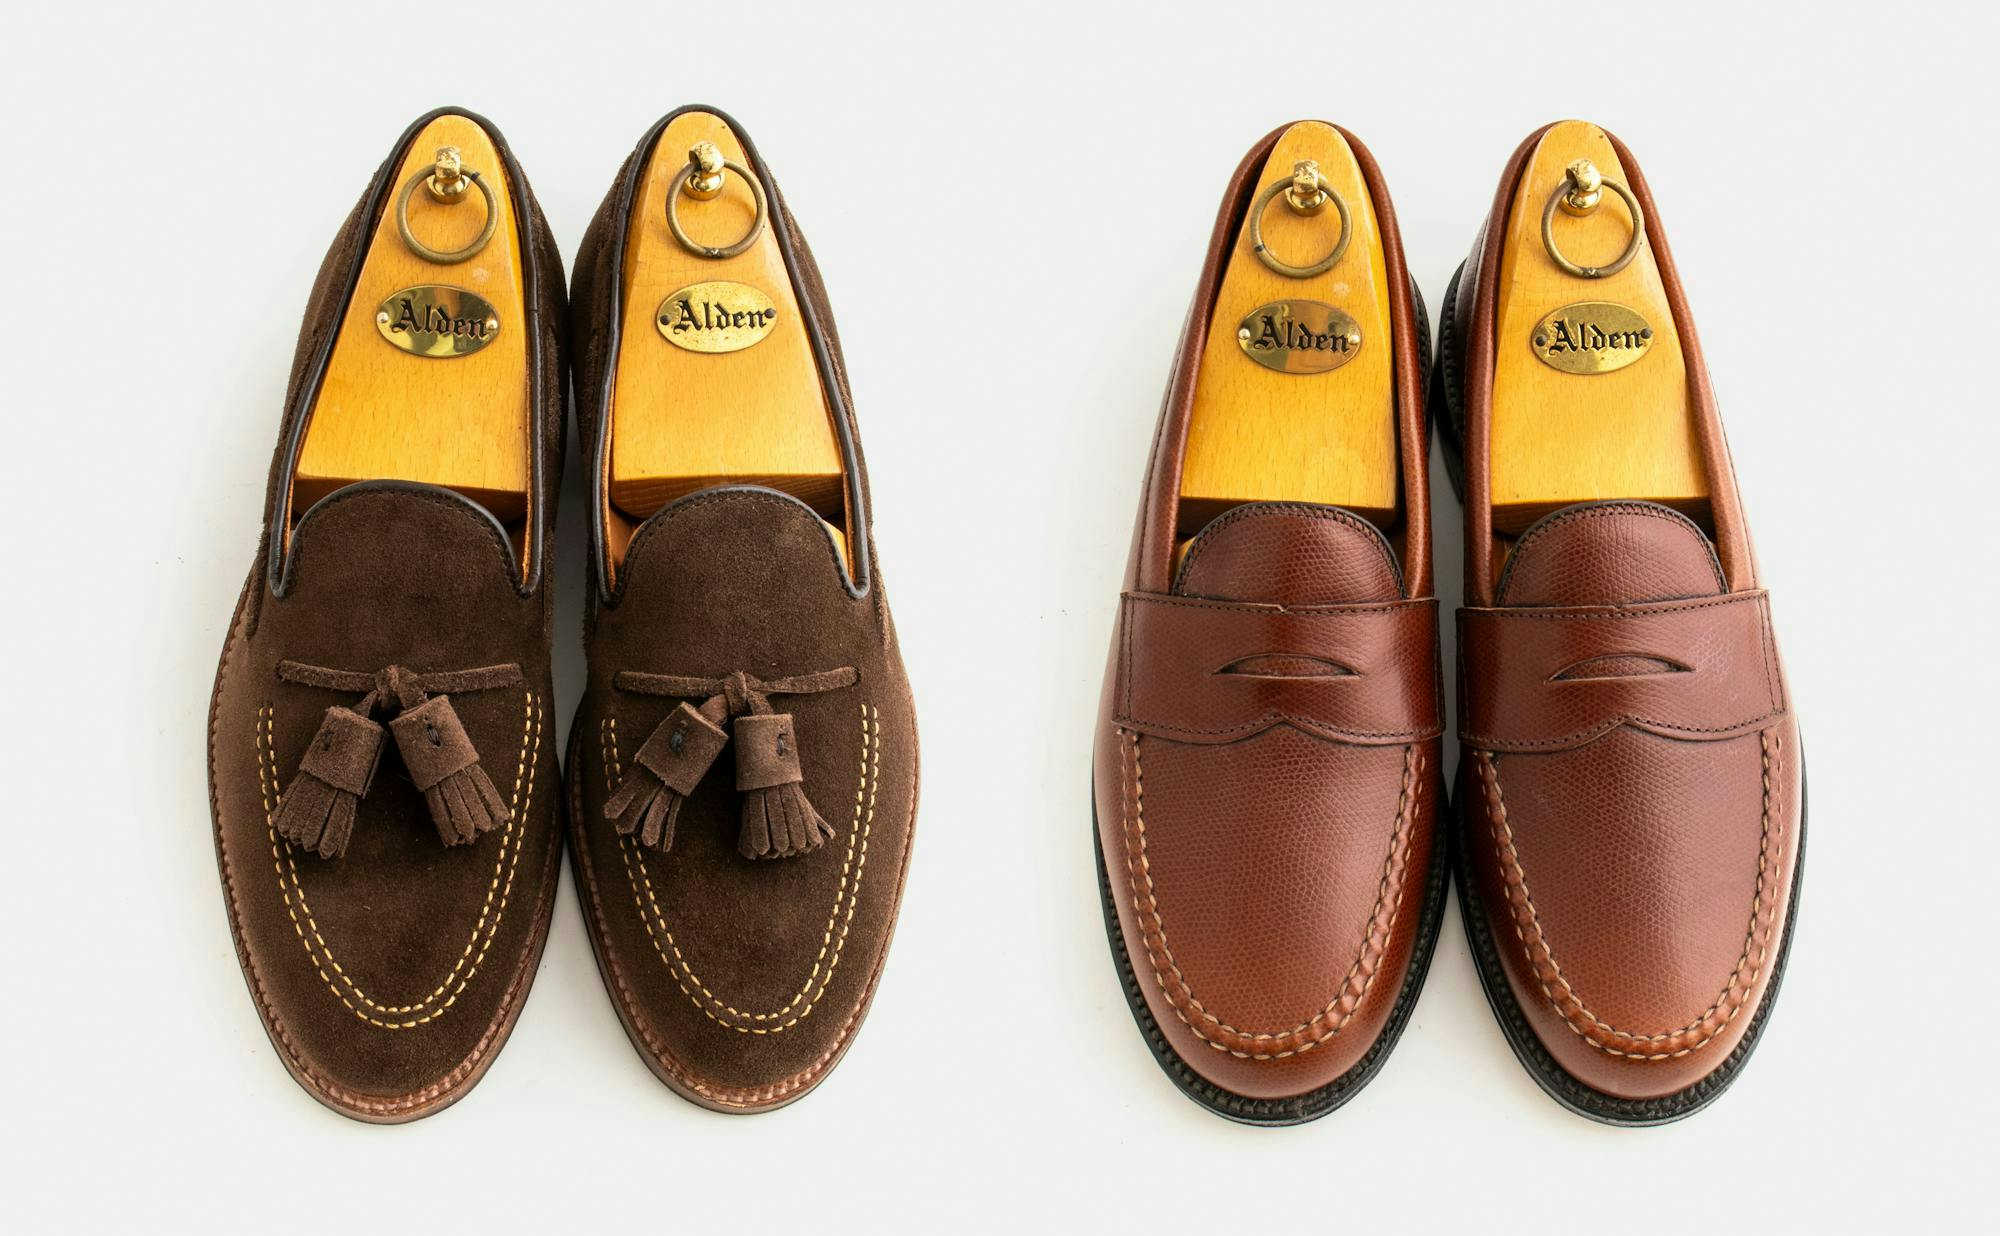 Two pairs of Alden loafers.